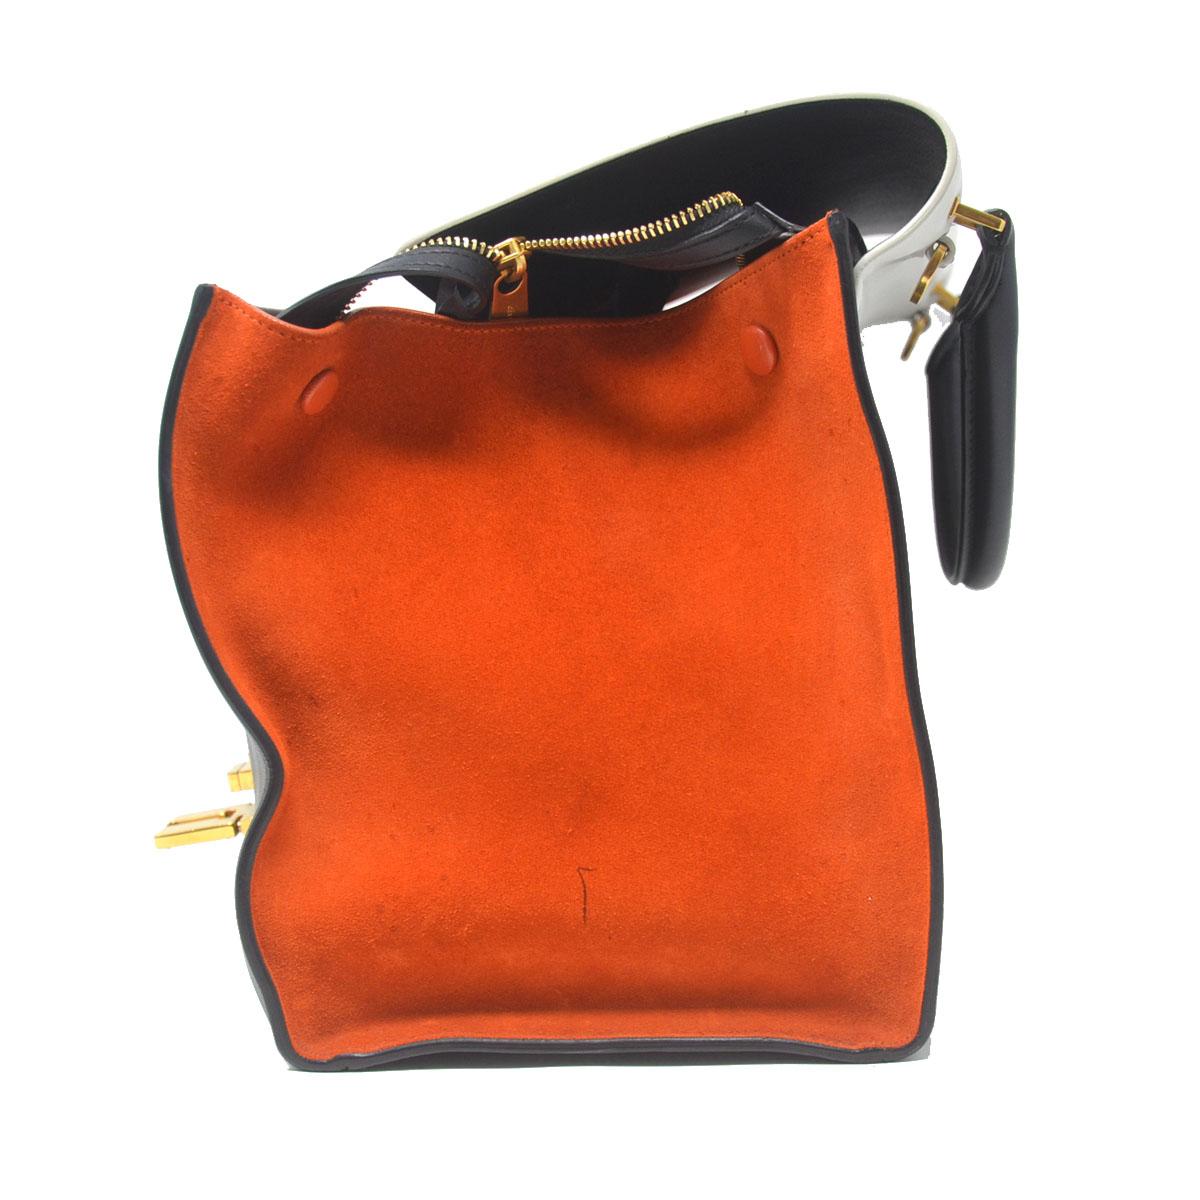 Company-Celine
Model-Trapeze Medium 
Color-Tri Color White Black and Orange 
Date Code-S-AT-4184 S-CU-5104
Material-Leather and Suede 
Measurements-11.75